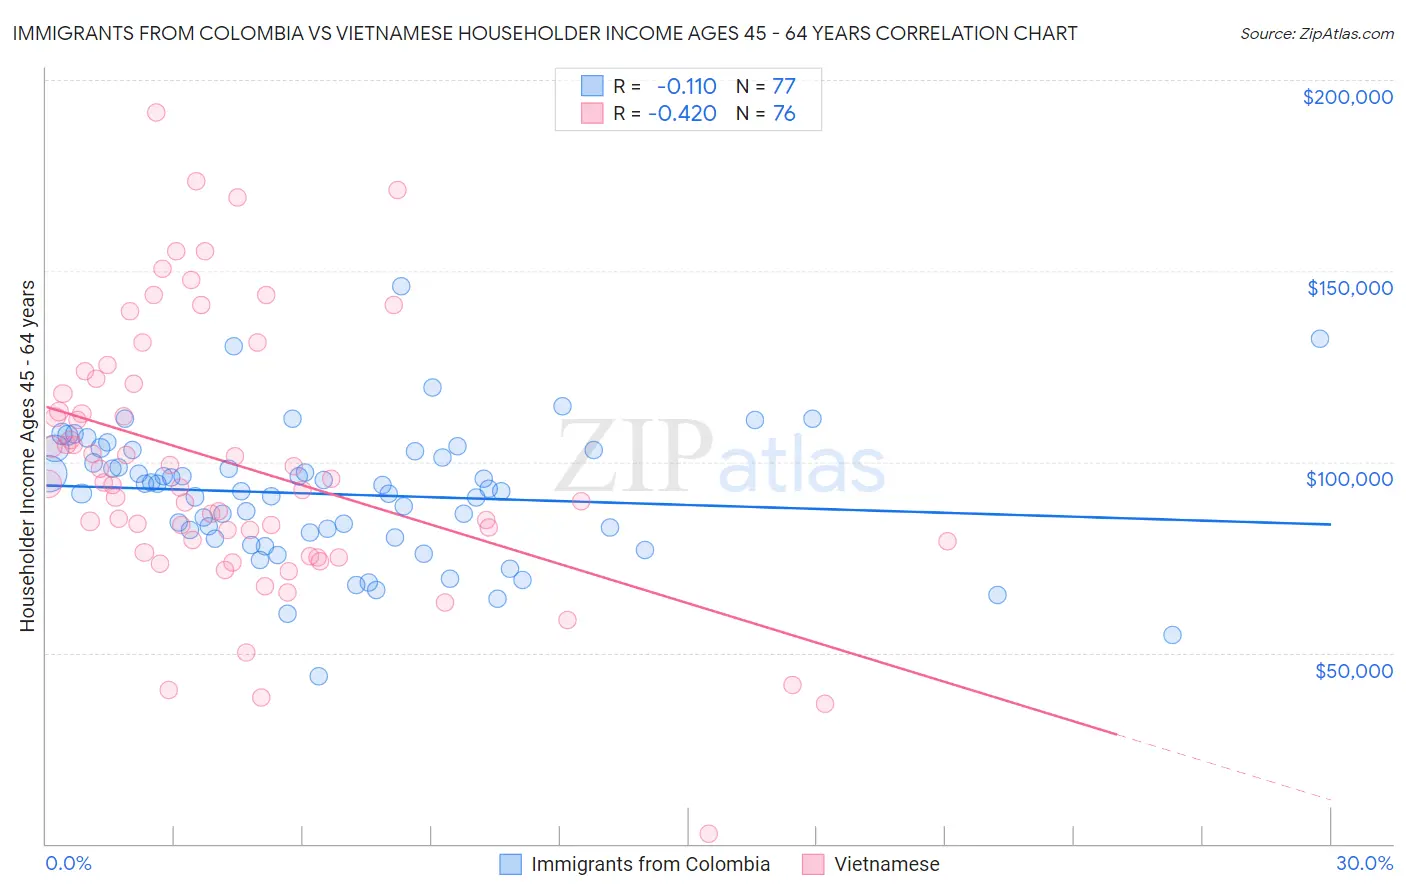 Immigrants from Colombia vs Vietnamese Householder Income Ages 45 - 64 years